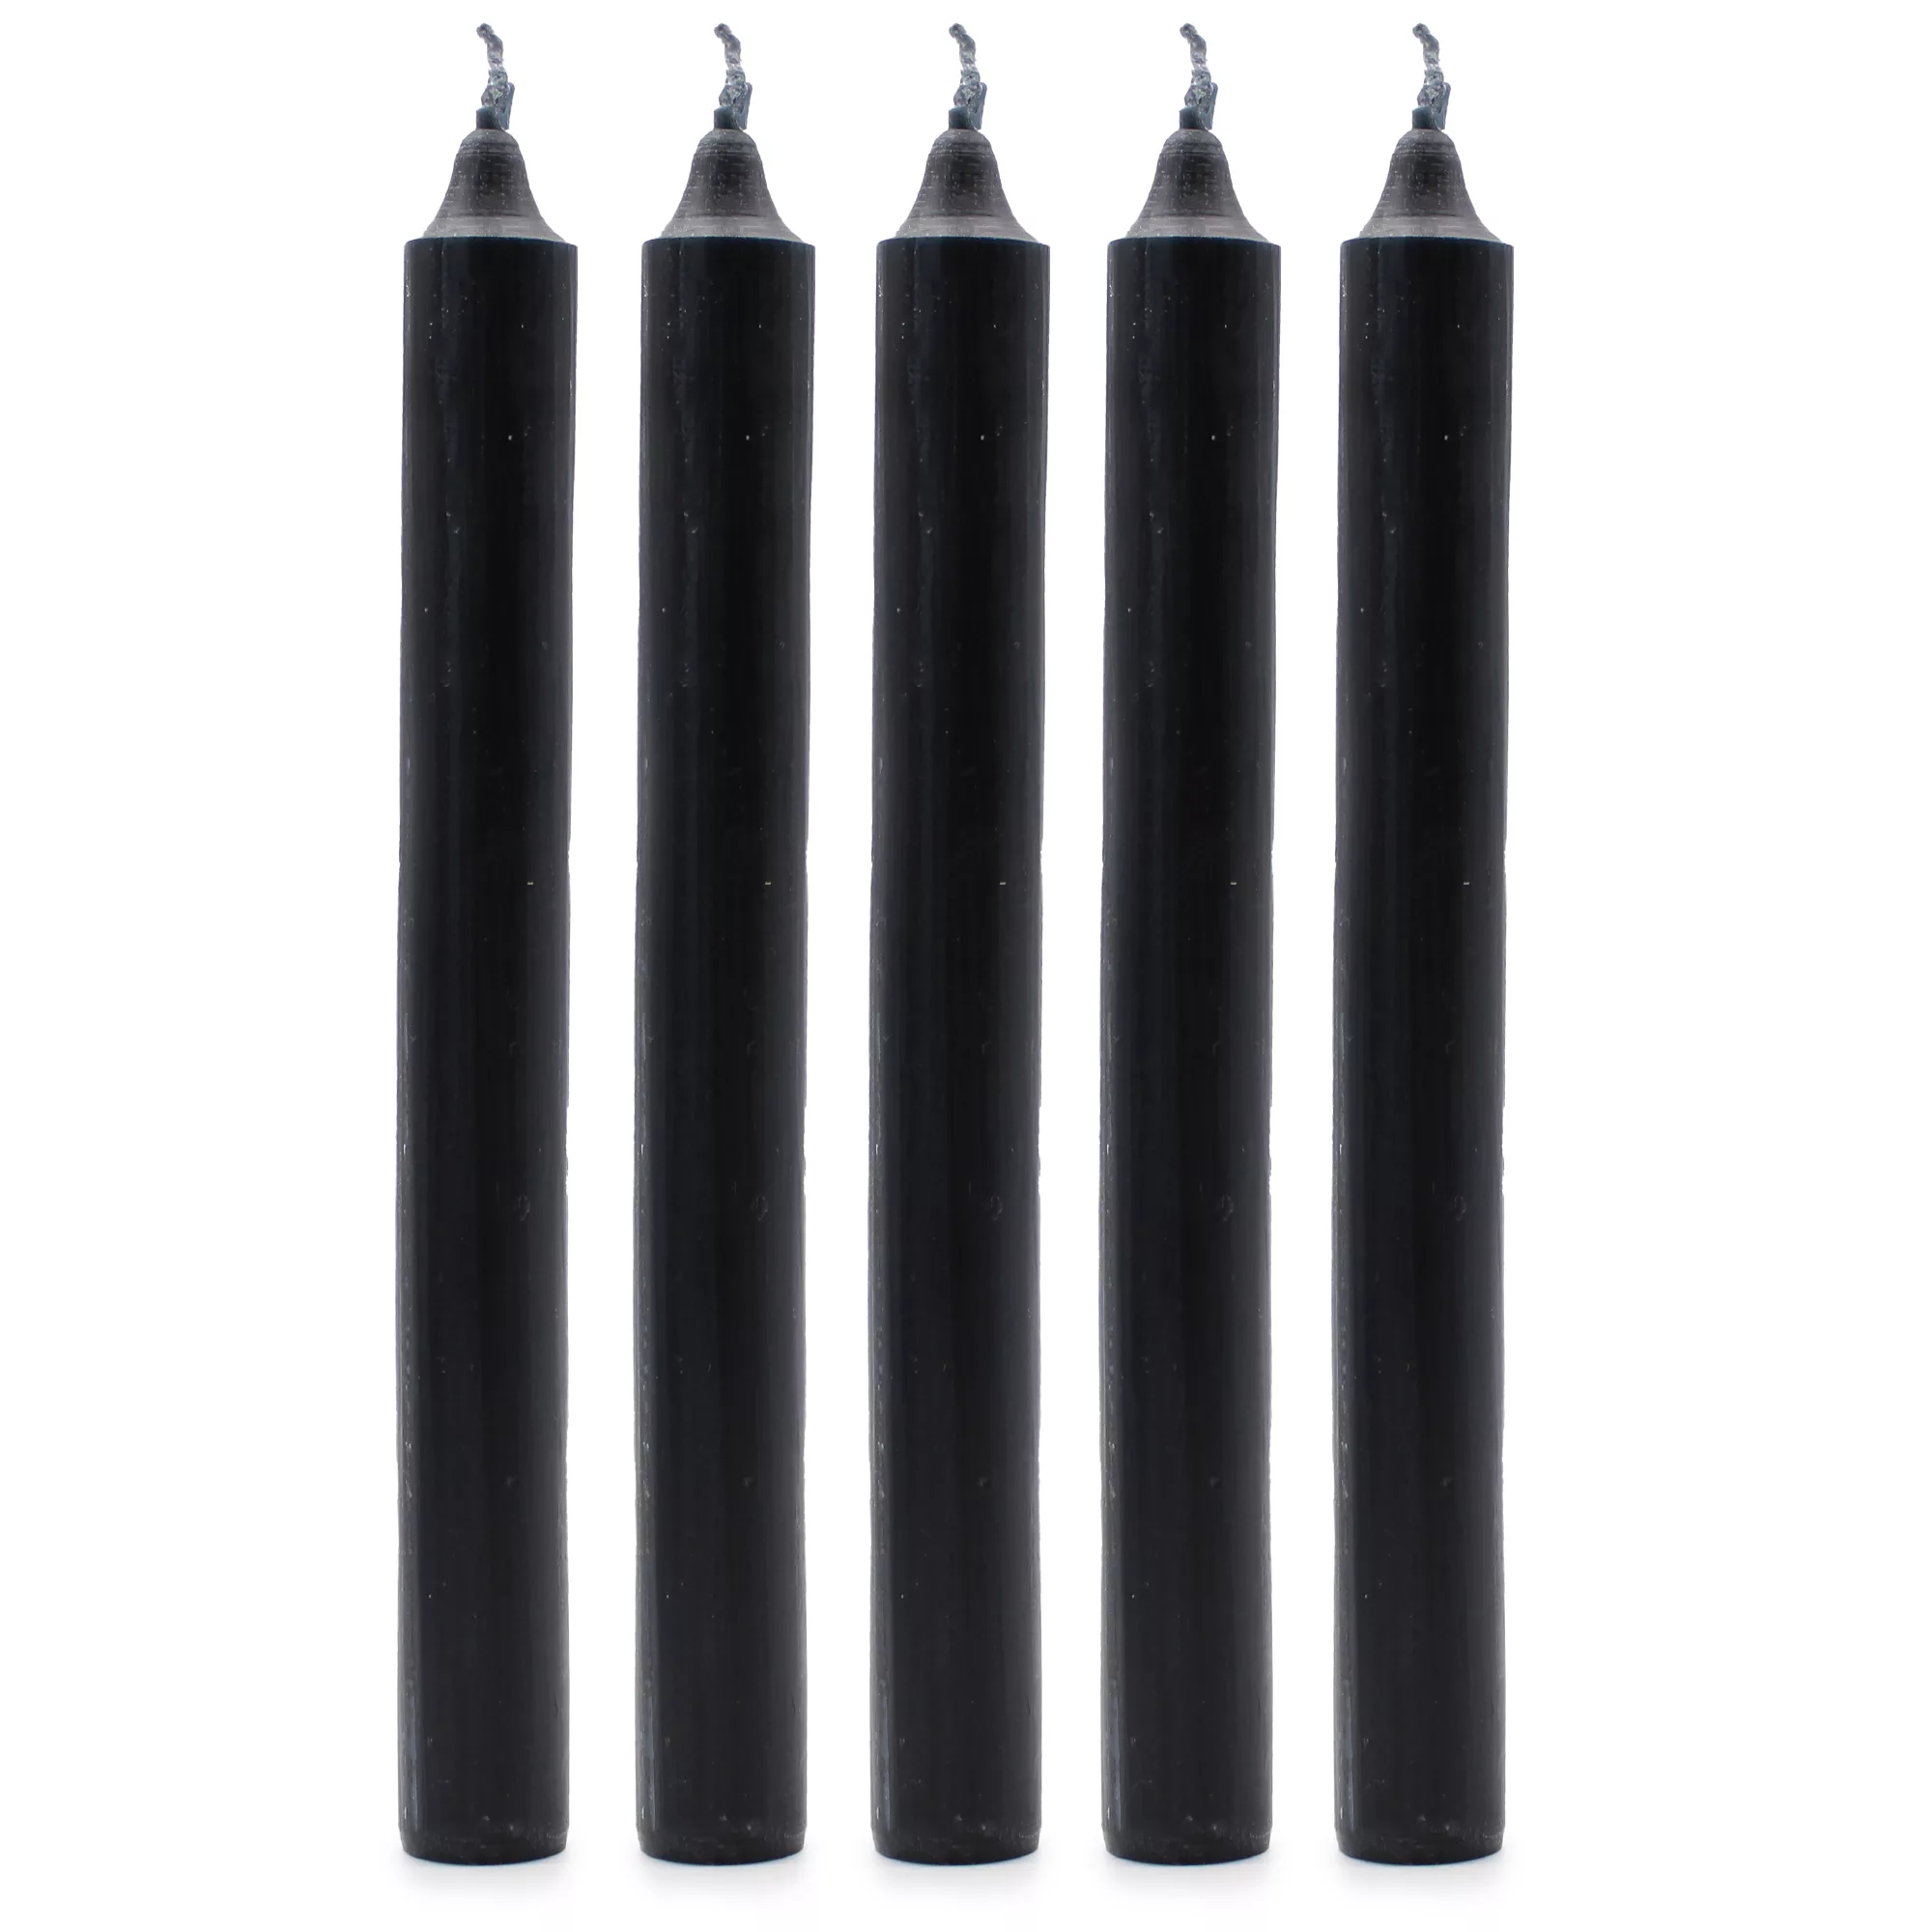 Solid Colour Dinner Candles – Rustic Black – Pack of 5